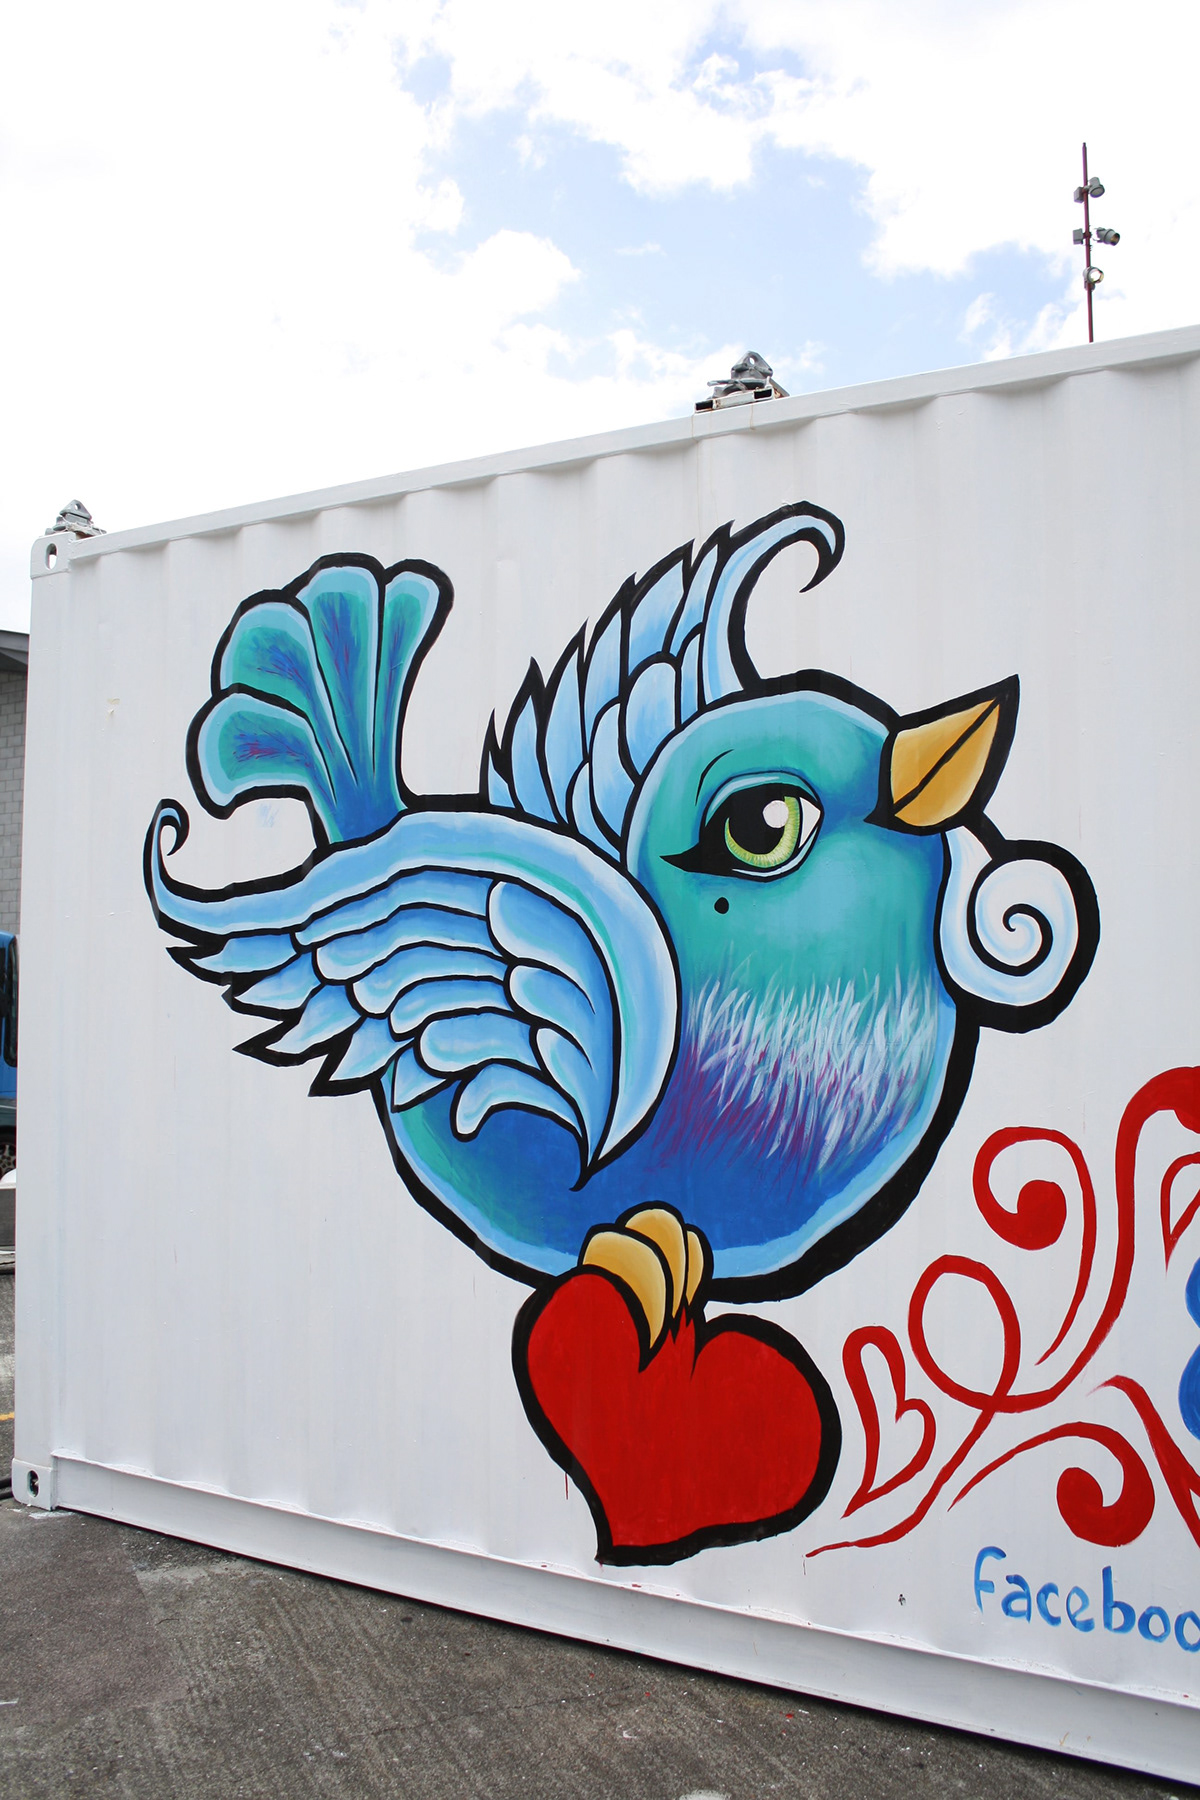 Love  dreaming  container bird  tui  tattoo  Mural big painting  exhibition auckland New Zealand